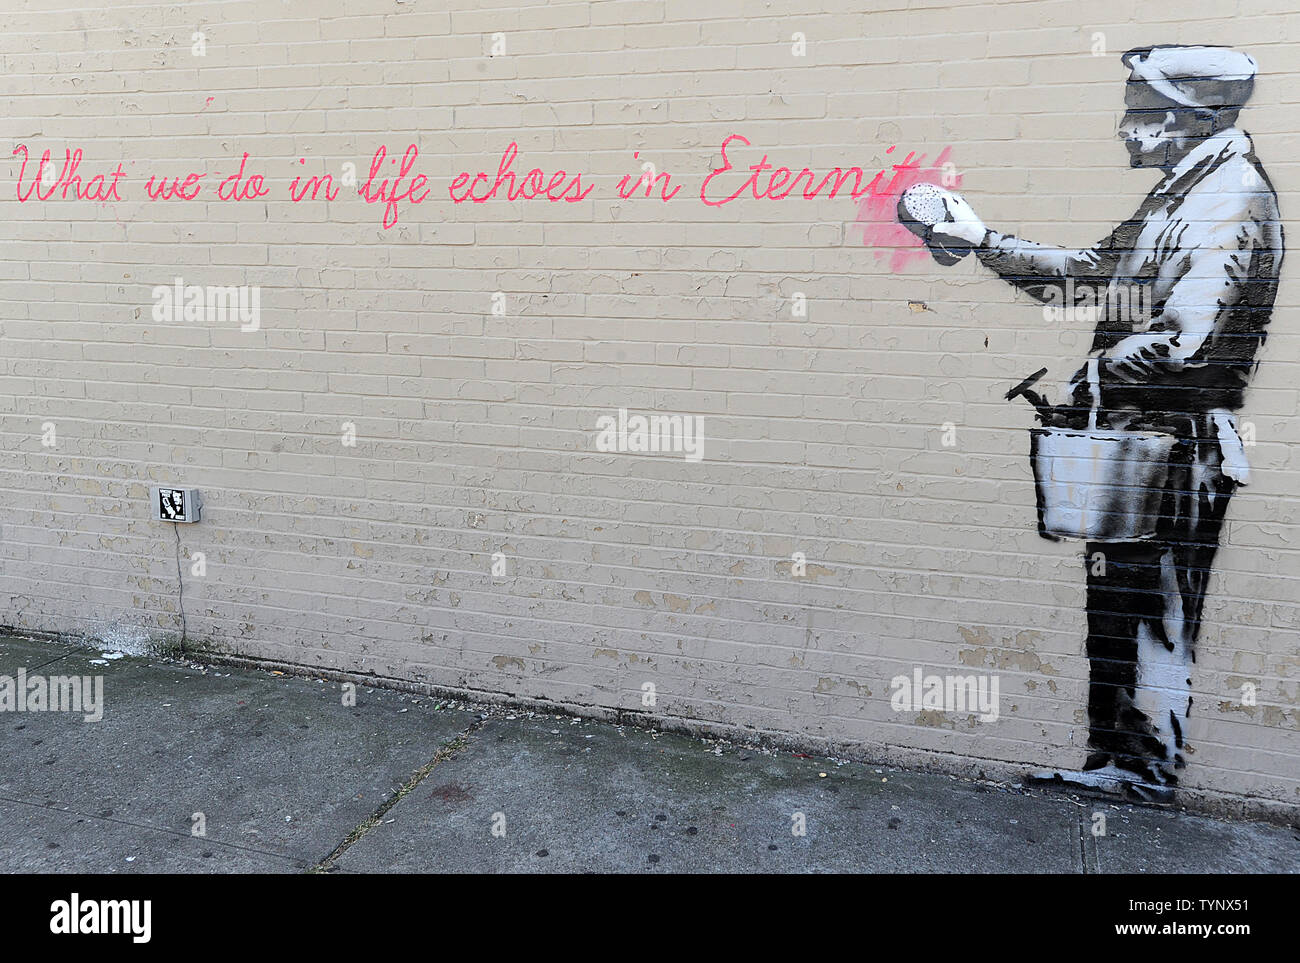 A mural created by British street artist Banksy is seen on a side of a building in Queens in New York City on October 14, 2013. Banksy is a pseudonymous England-based graffiti artist, political activist, film director, and painter. His satirical street art and subversive epigrams combine dark humor with graffiti done in a distinctive stenciling technique.    UPI/Dennis Van Tine Stock Photo